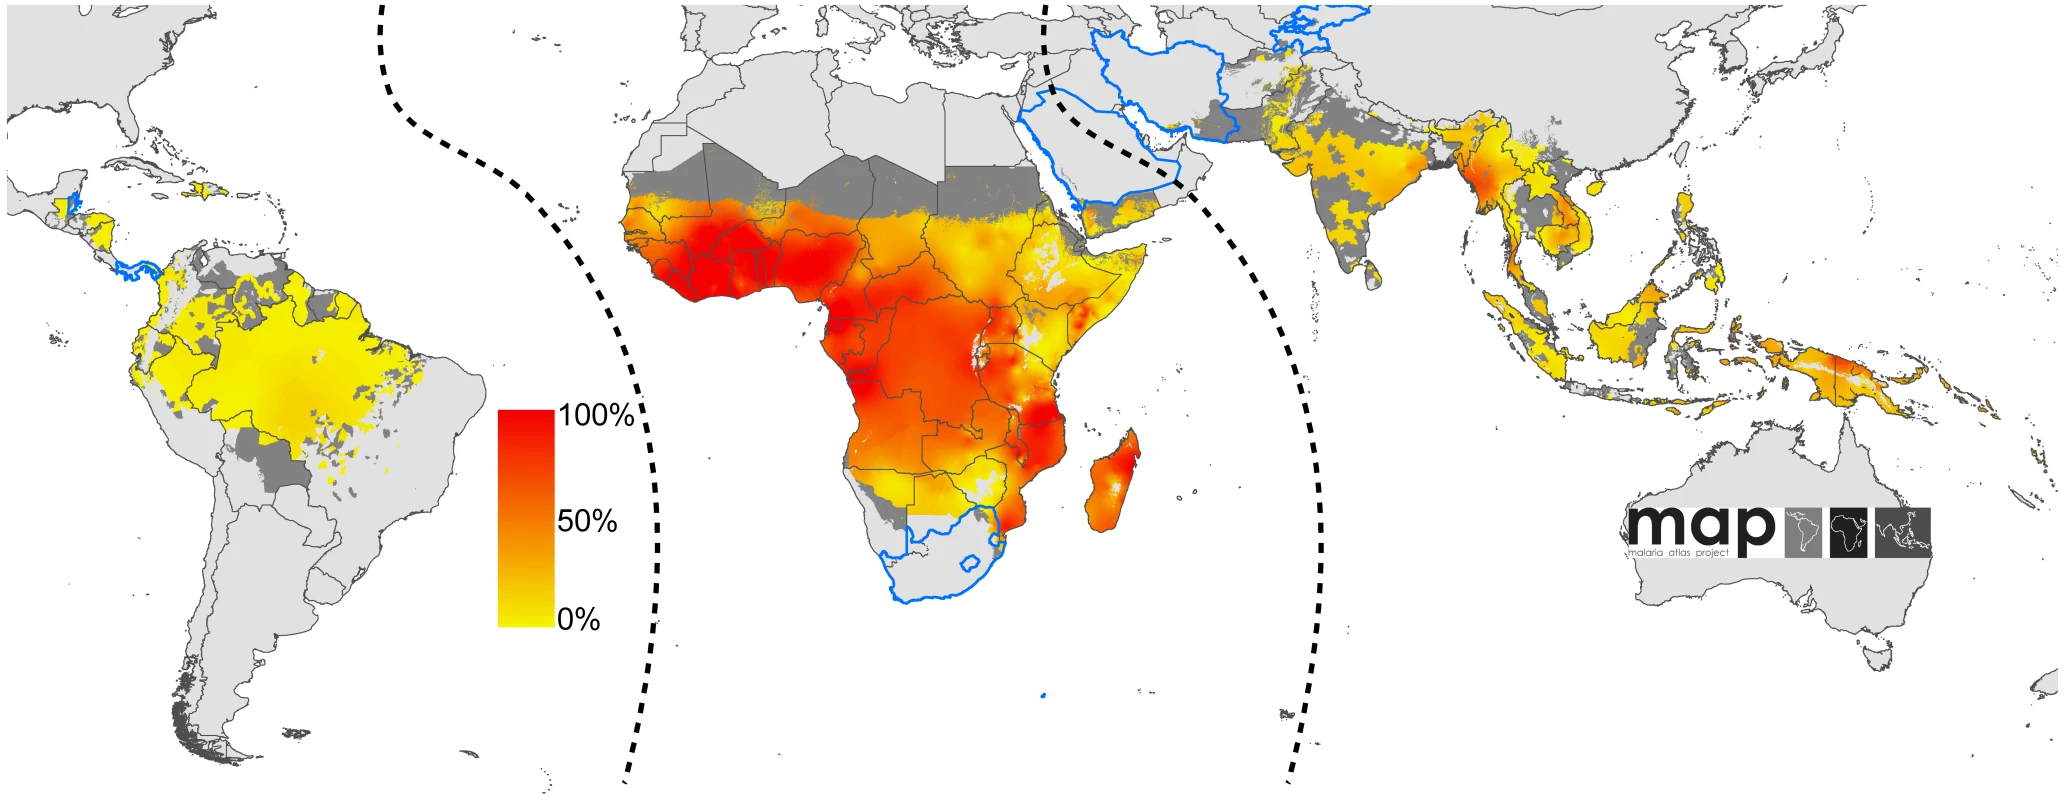 Global limits and endemicity of <i>P. falciparum</i> in 2007.